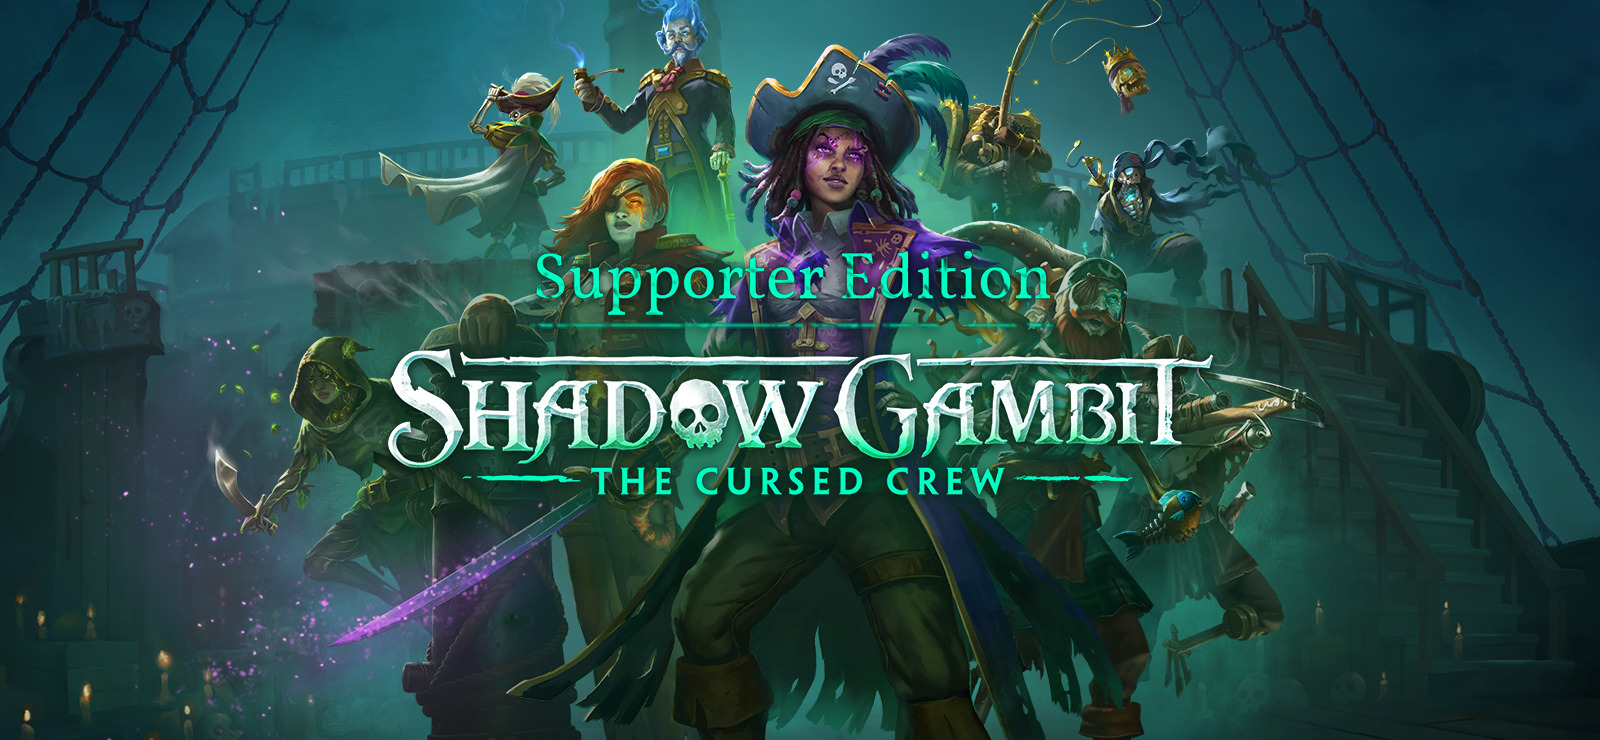 20% Shadow Gambit: The Cursed Crew on